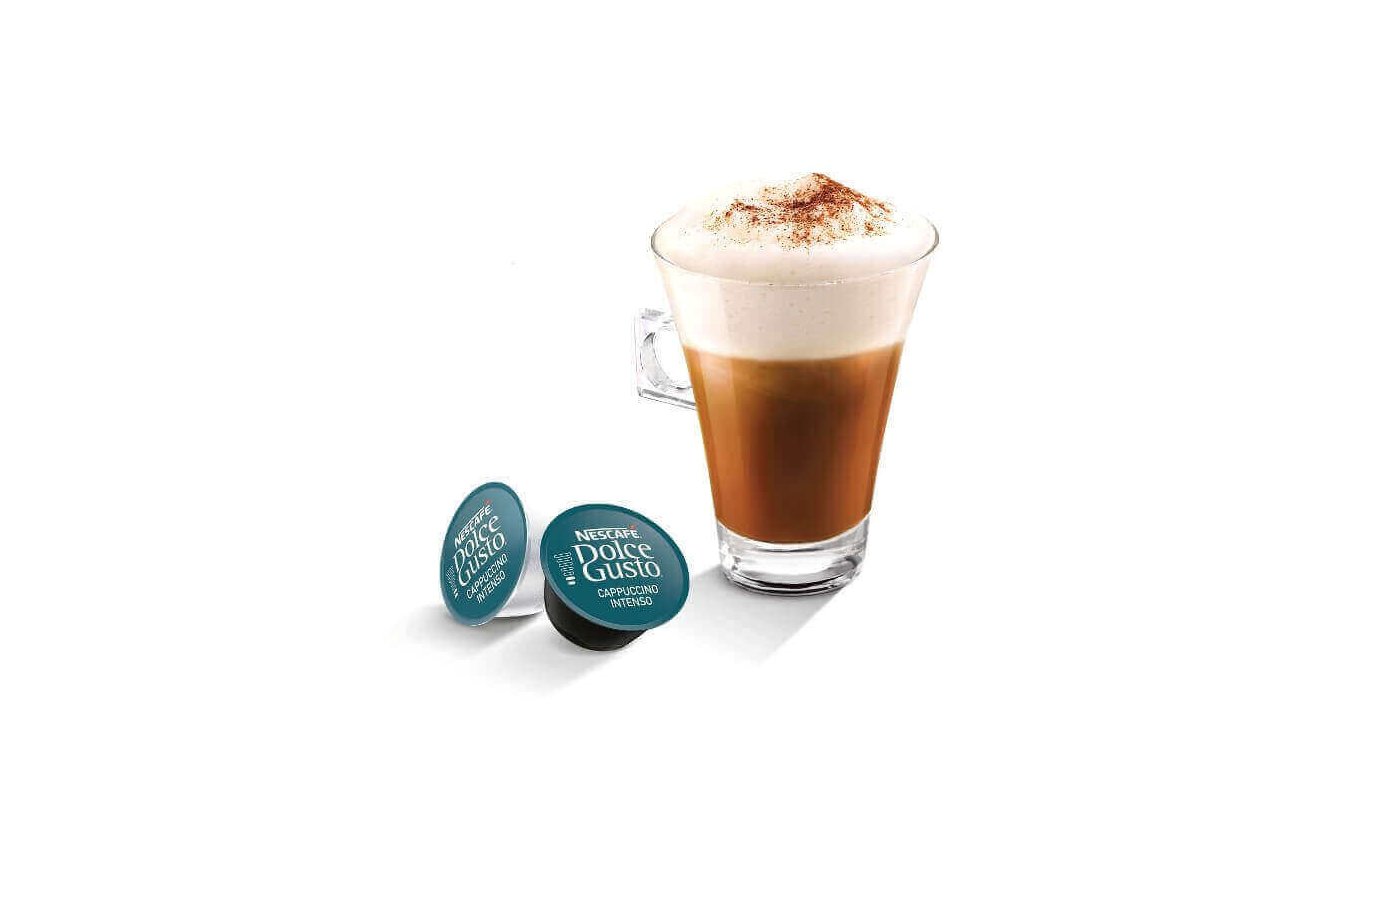 Dolce gusto cappuccino. Капсулы Nescafe Dolce gusto Cappuccino. Капсулы Dolce gusto Cappuccino. Капучино Нескафе капсулы. Нескафе Дольче густо капсулы капучино.